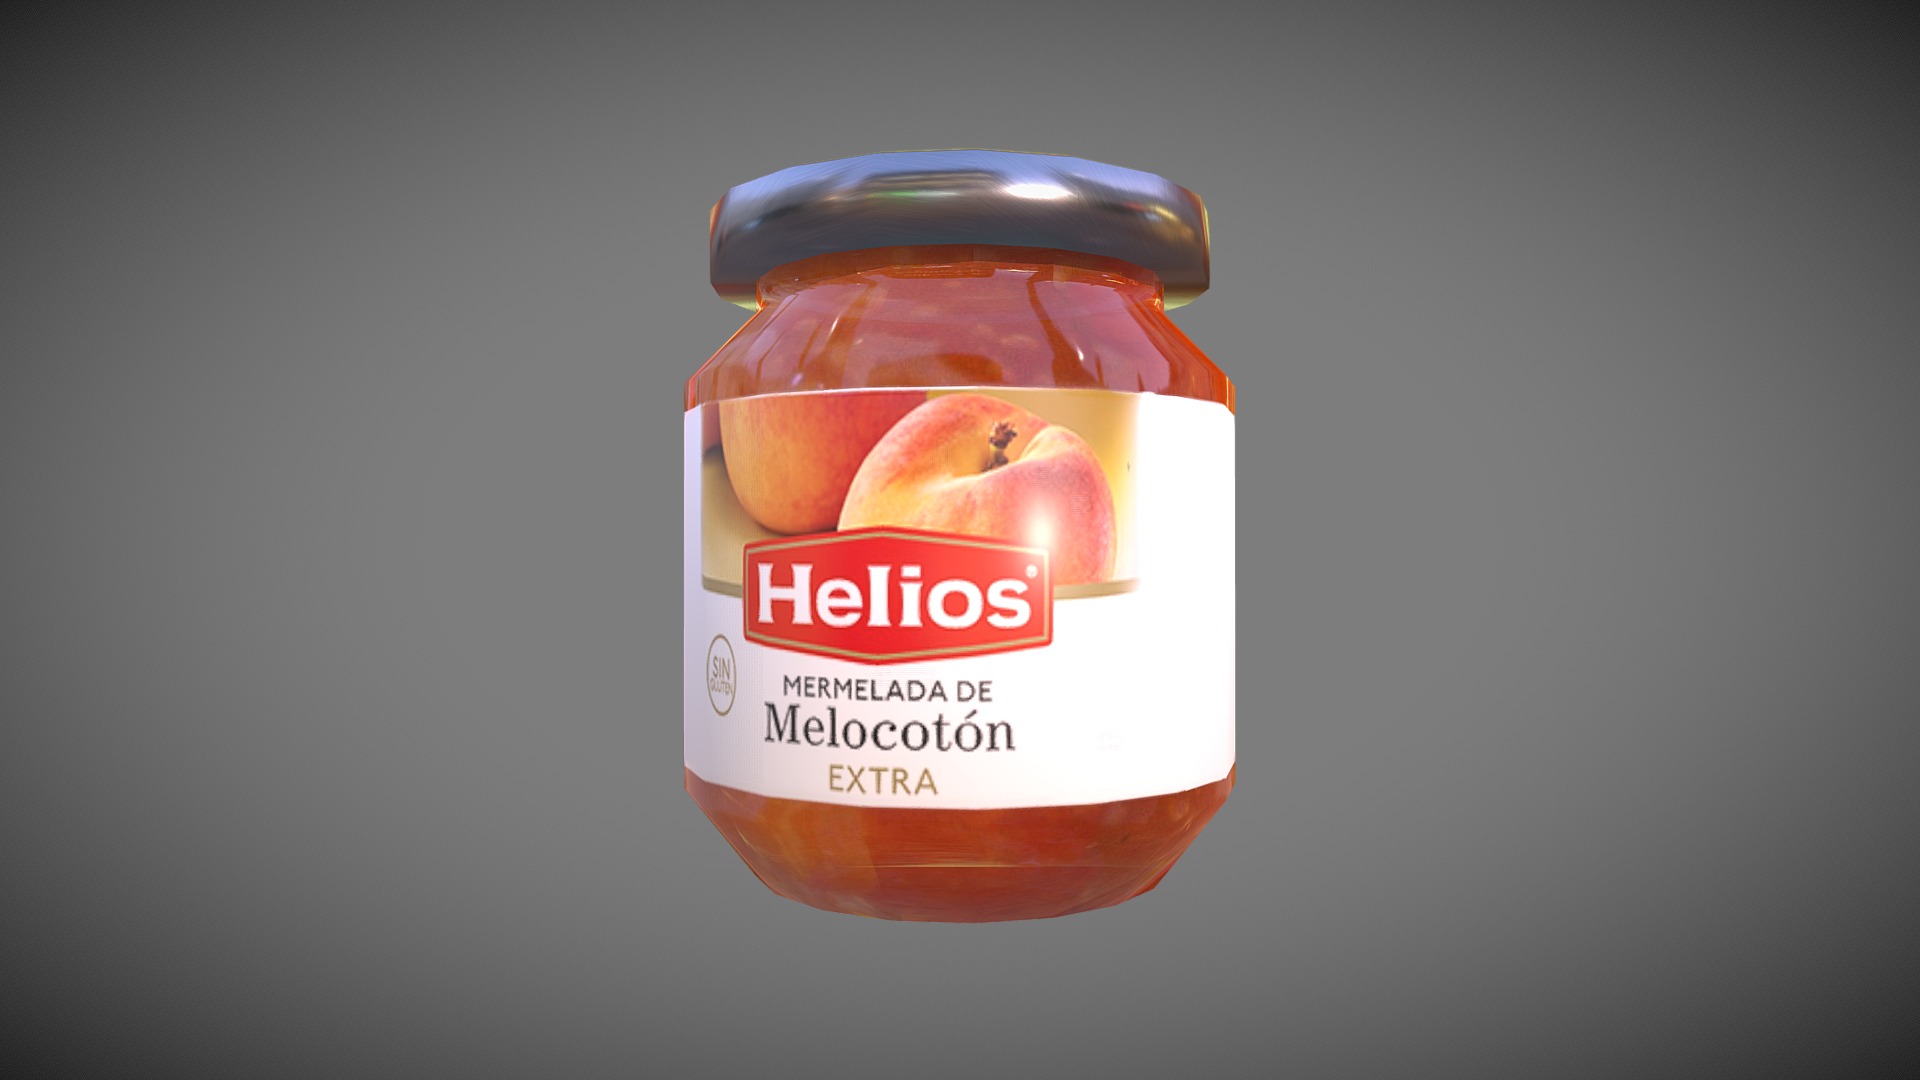 3D model Mermelada Melocotón Helios - This is a 3D model of the Mermelada Melocotón Helios. The 3D model is about a jar of food.